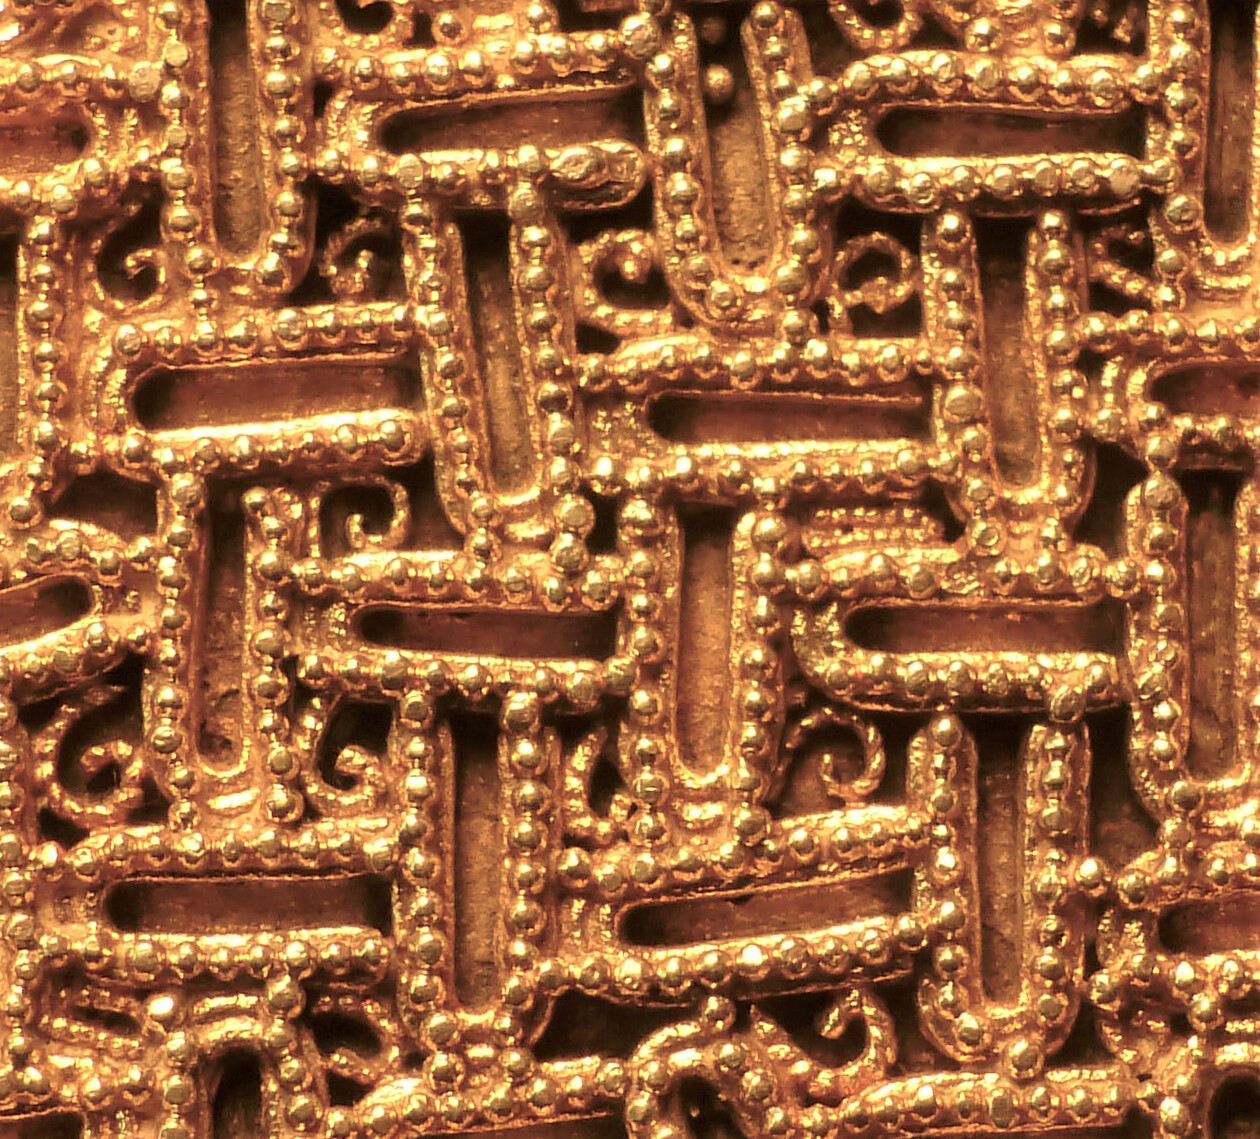 Trier casket, c. 3 cm detail of large medallion on front. Granulation sits on two parallel wires, comparable to a marble run.